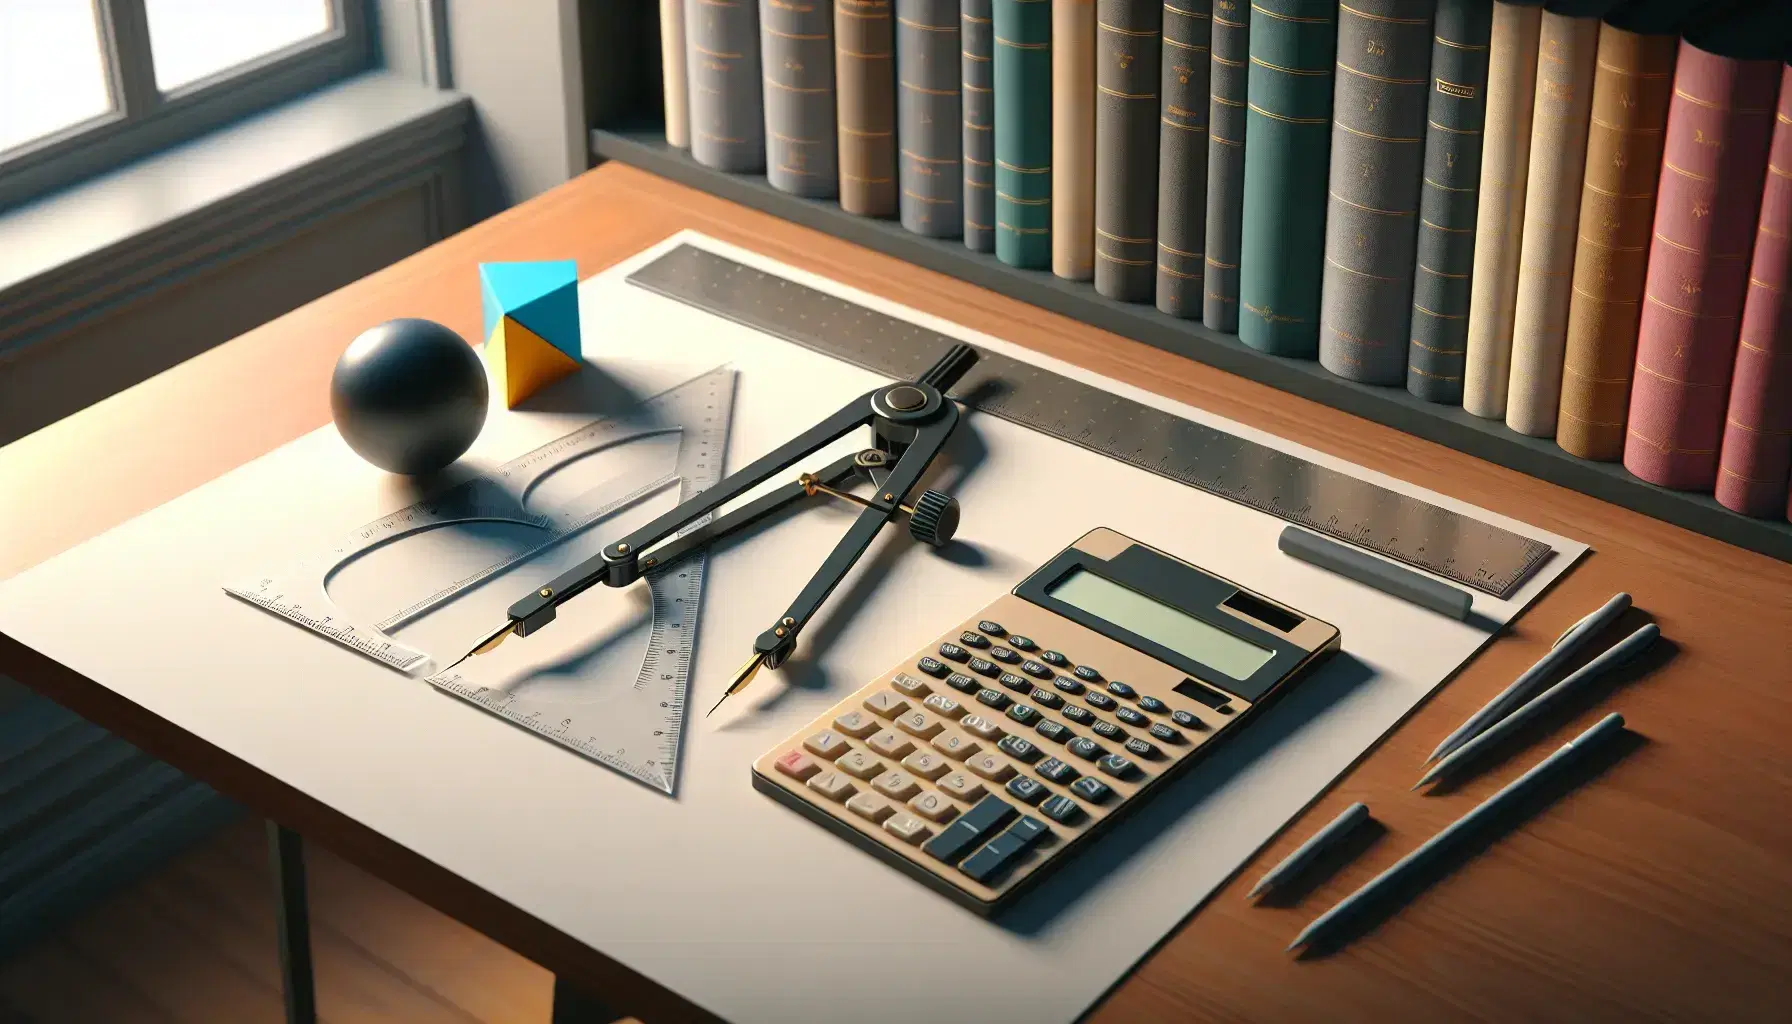 Tidy desk with compass, ruler, solar calculator and 3D geometric shapes in an illuminated study.